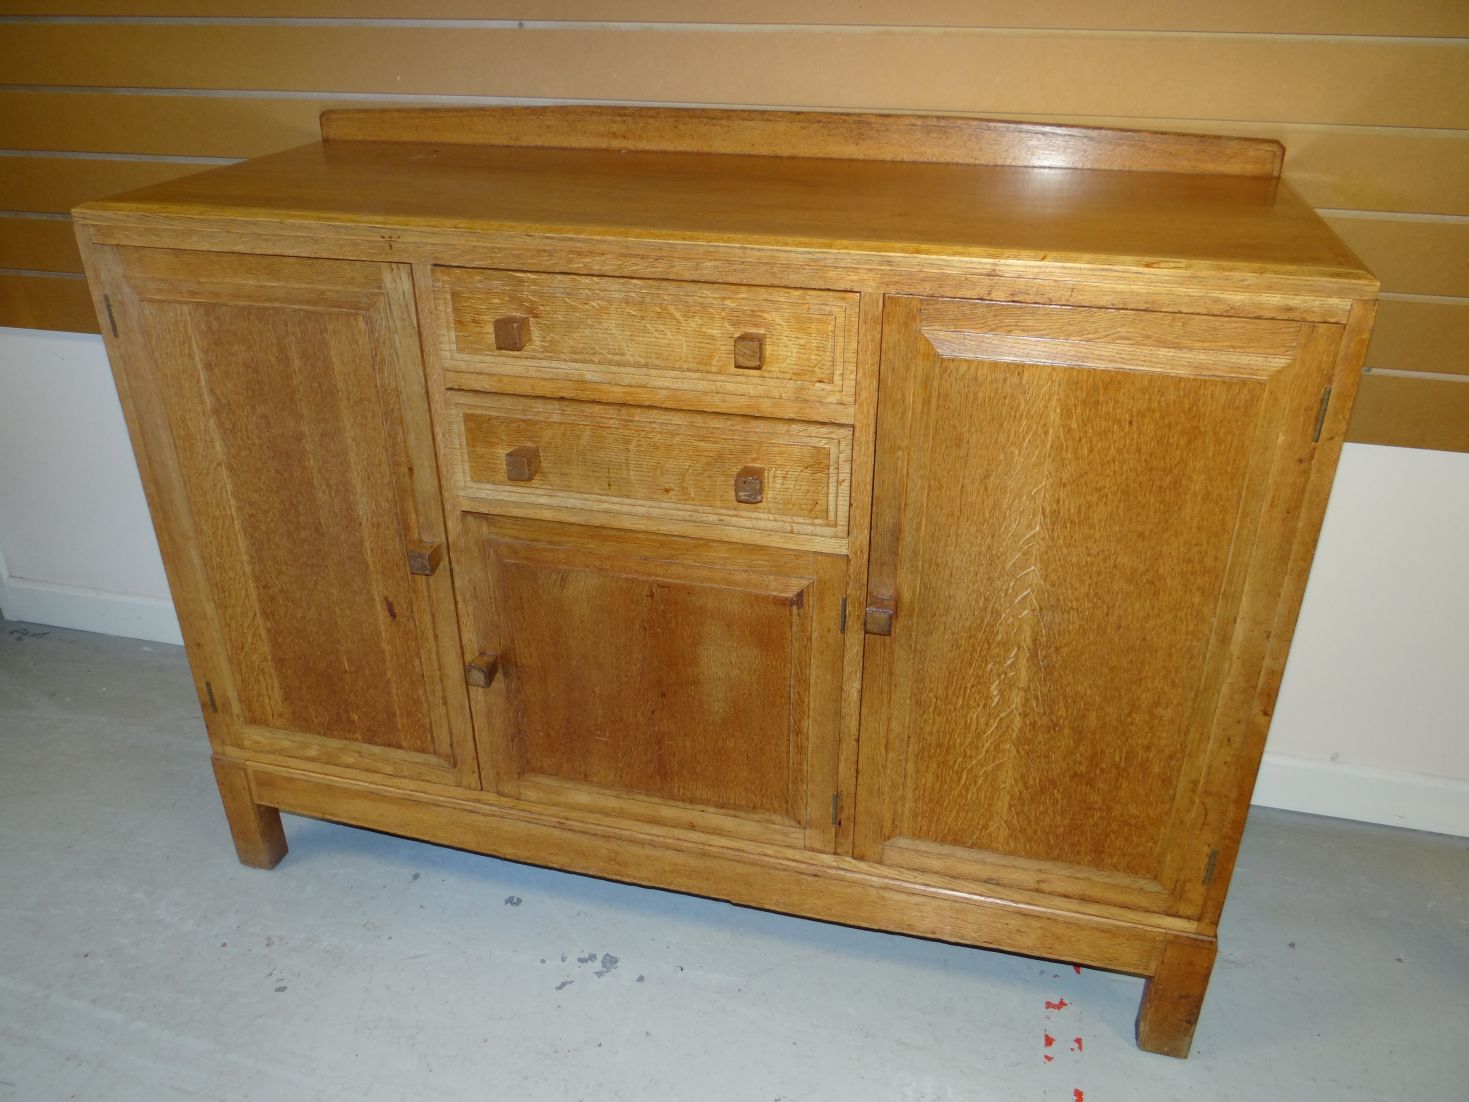 A light oak Brynmawr Furniture 'Talgarth' rail-back panelled sideboard with a combination of two